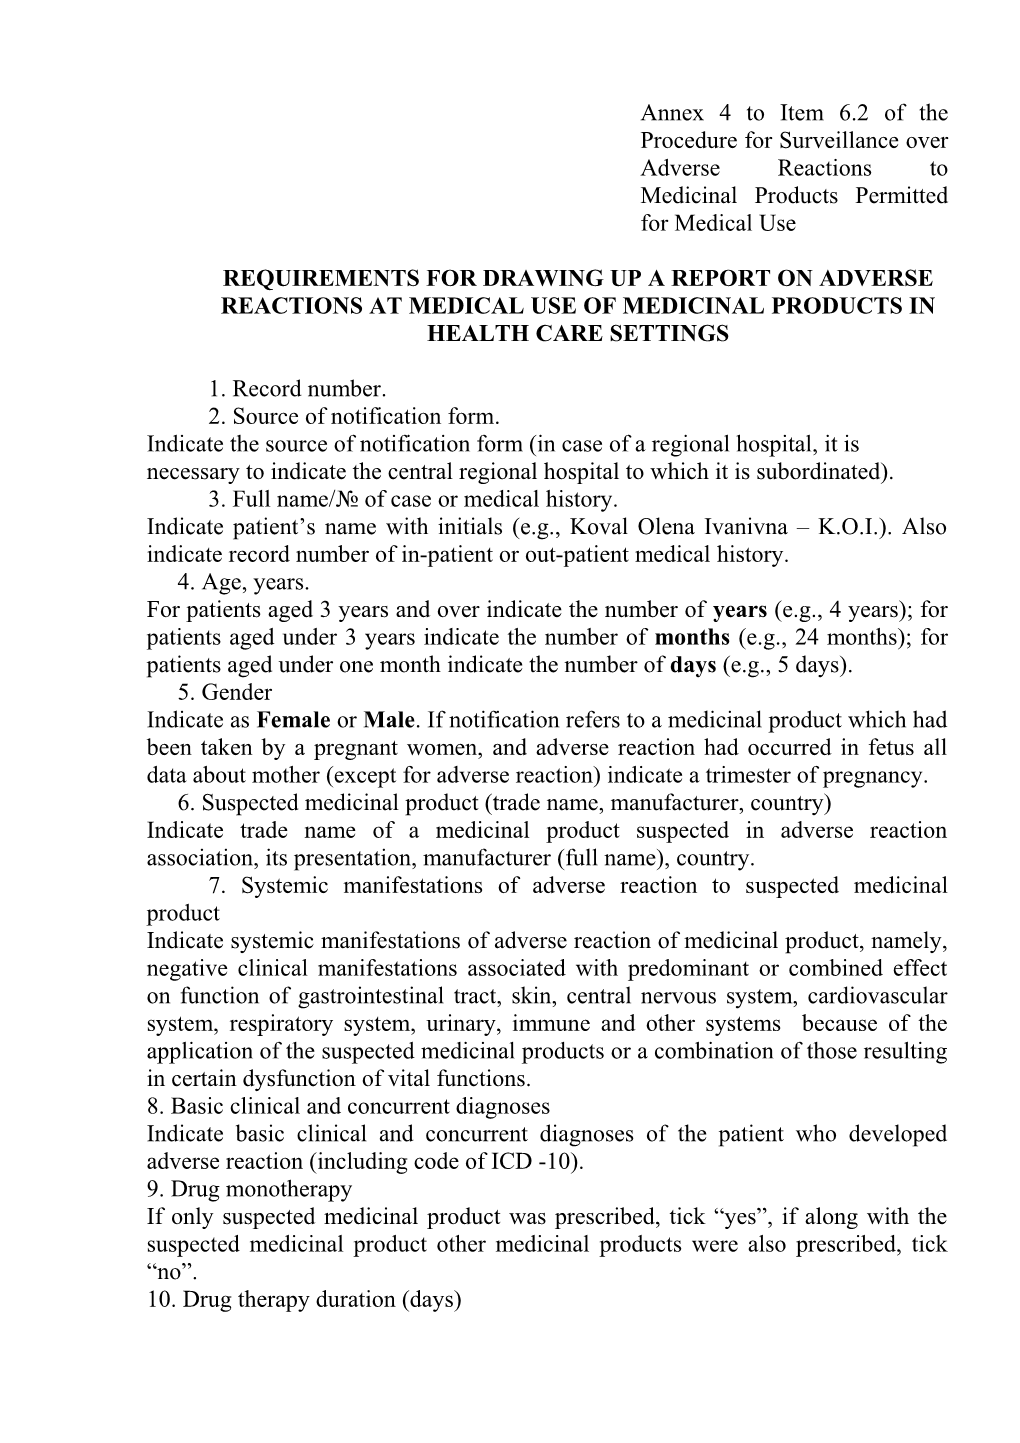 Requirements for DRAWING up a REPORT on ADVERSE REACTIONS at Medical Use of MEDICINAL